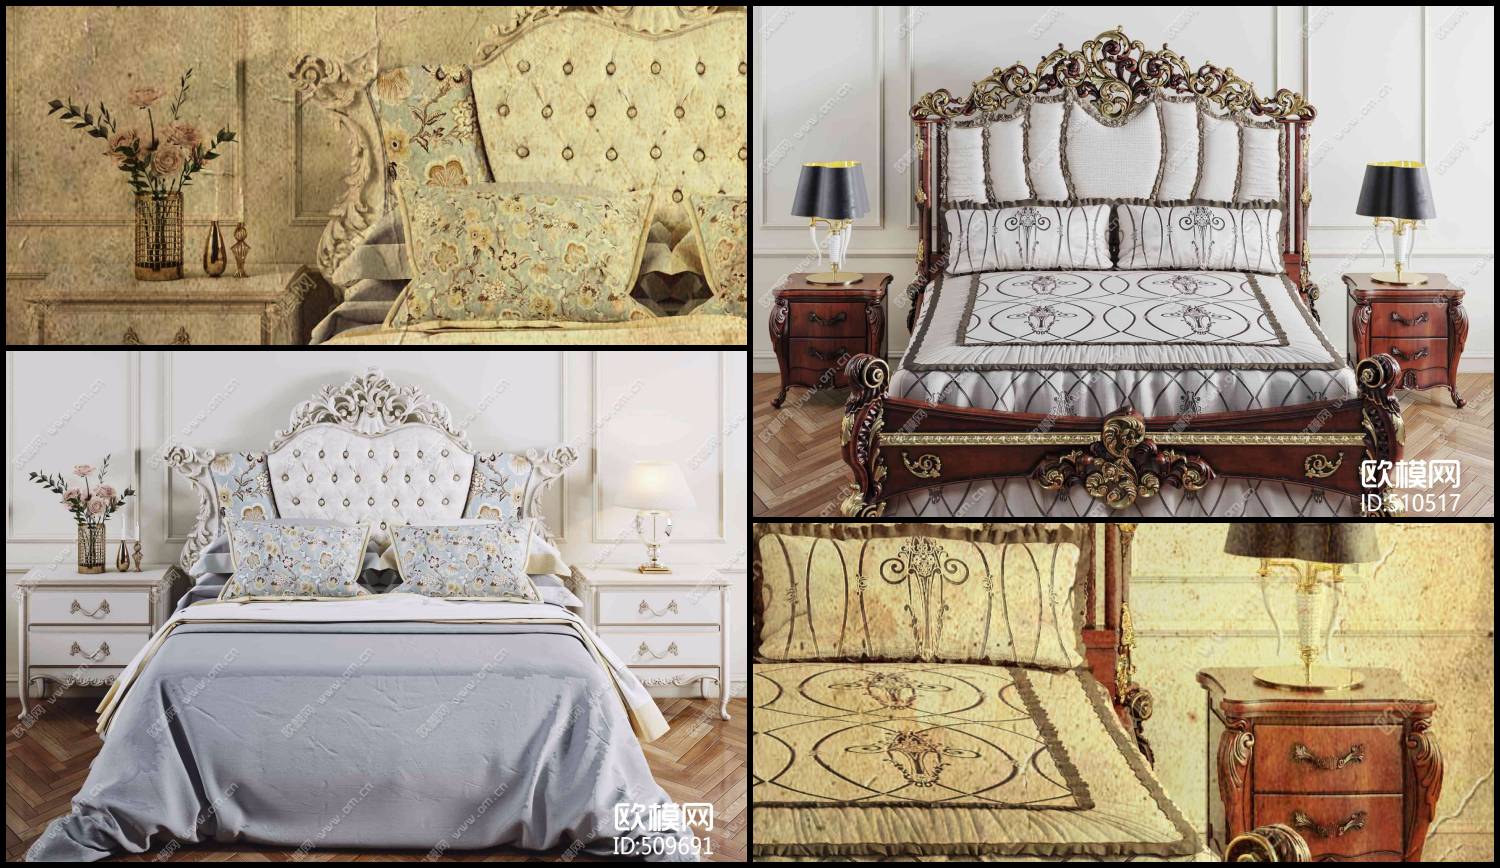 11033. 3D Neoclassical Bed Model For Free Download